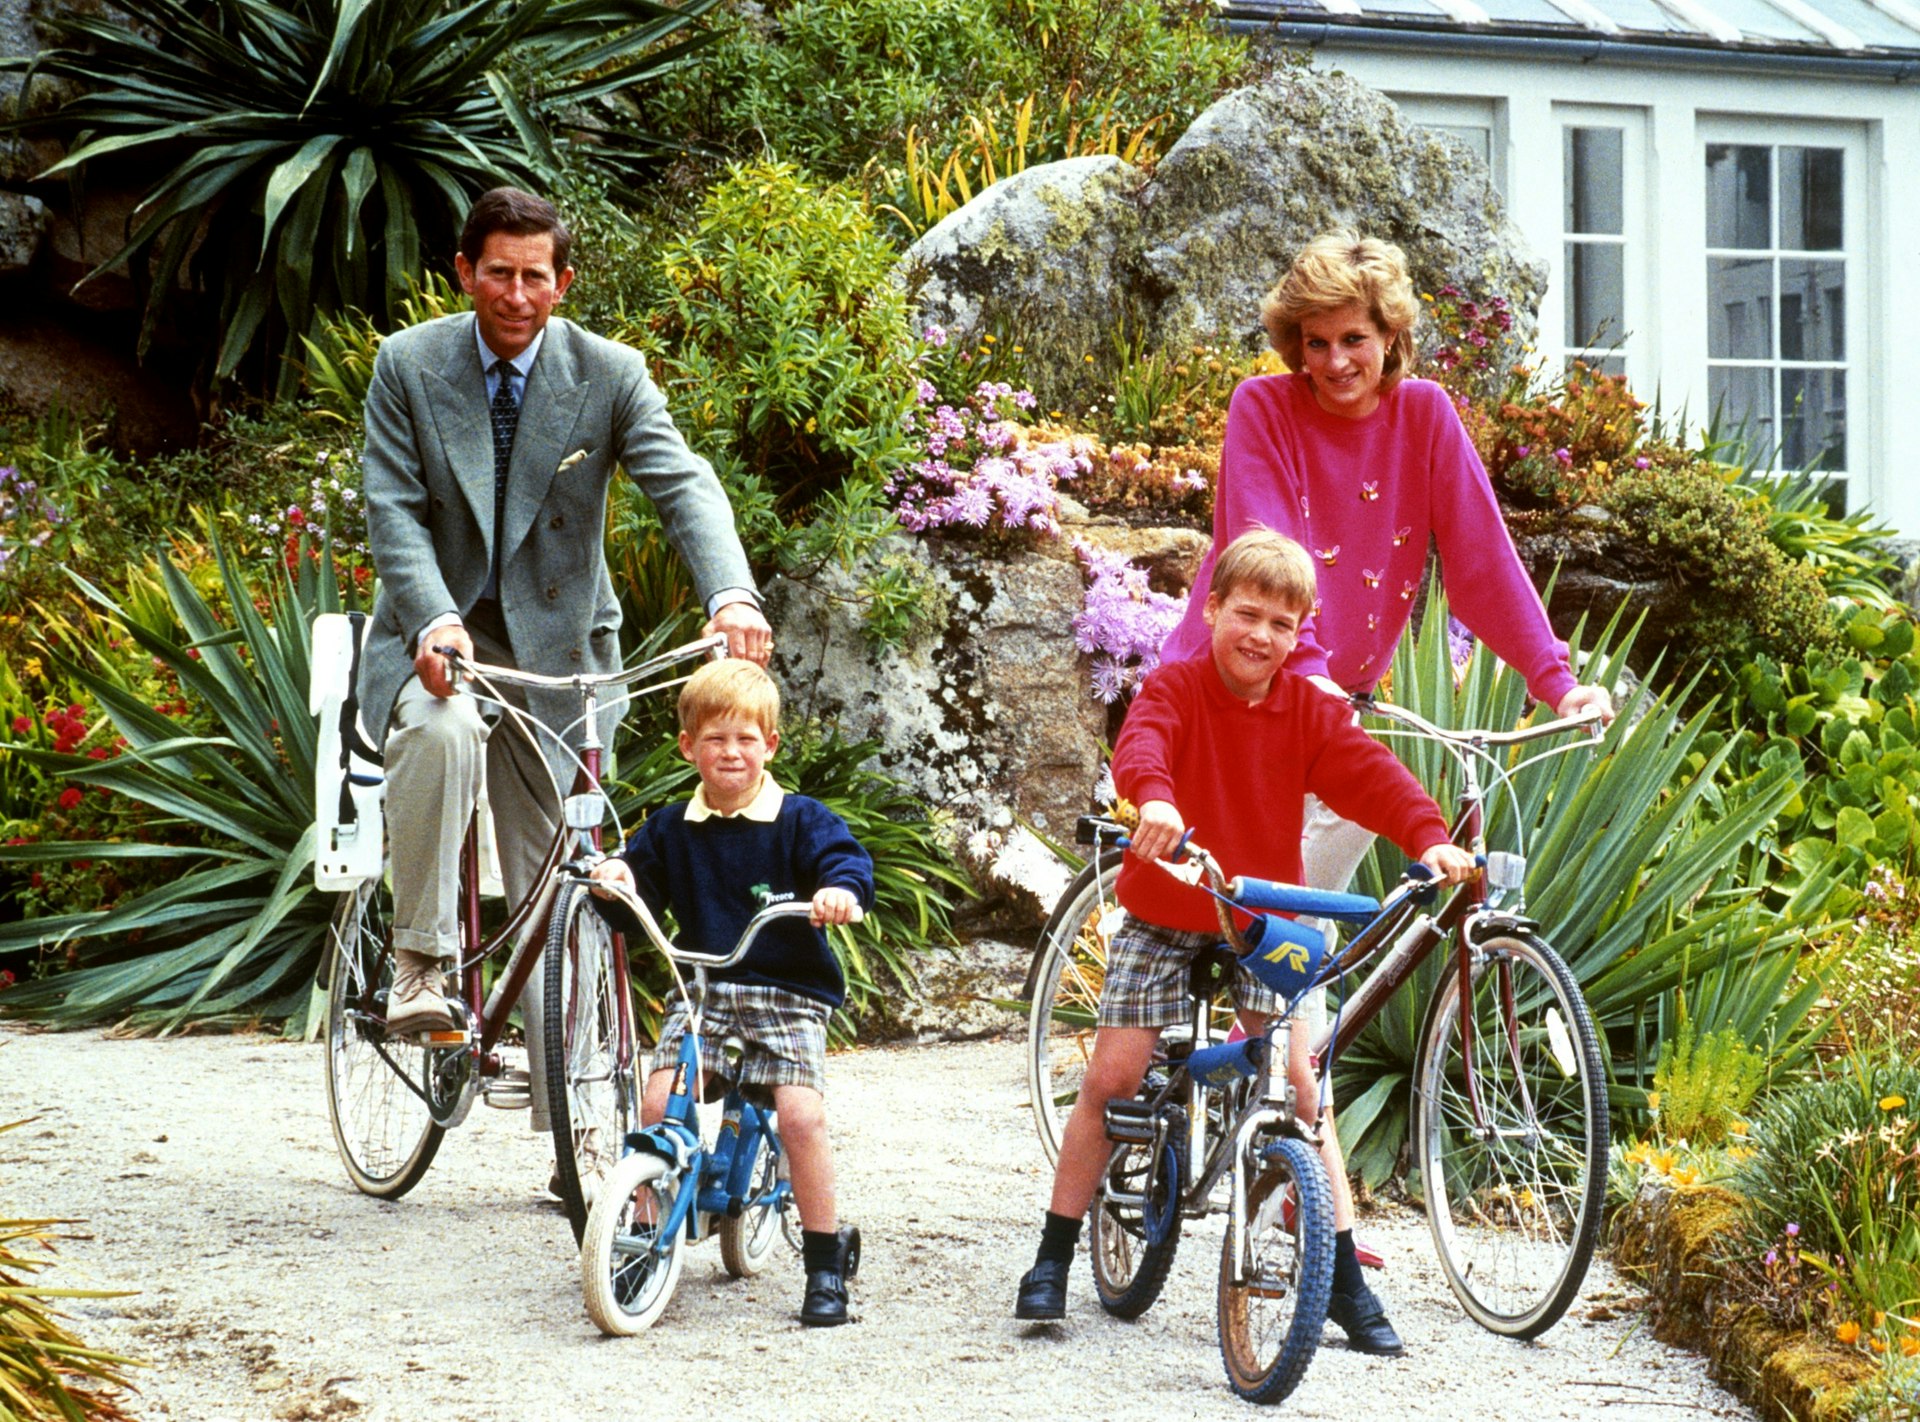 The Prince and Princess of Wales with sons Prince William, right, and Prince Harry prepare for a cycling trip in Tresco during their holiday in the Scilly Isles